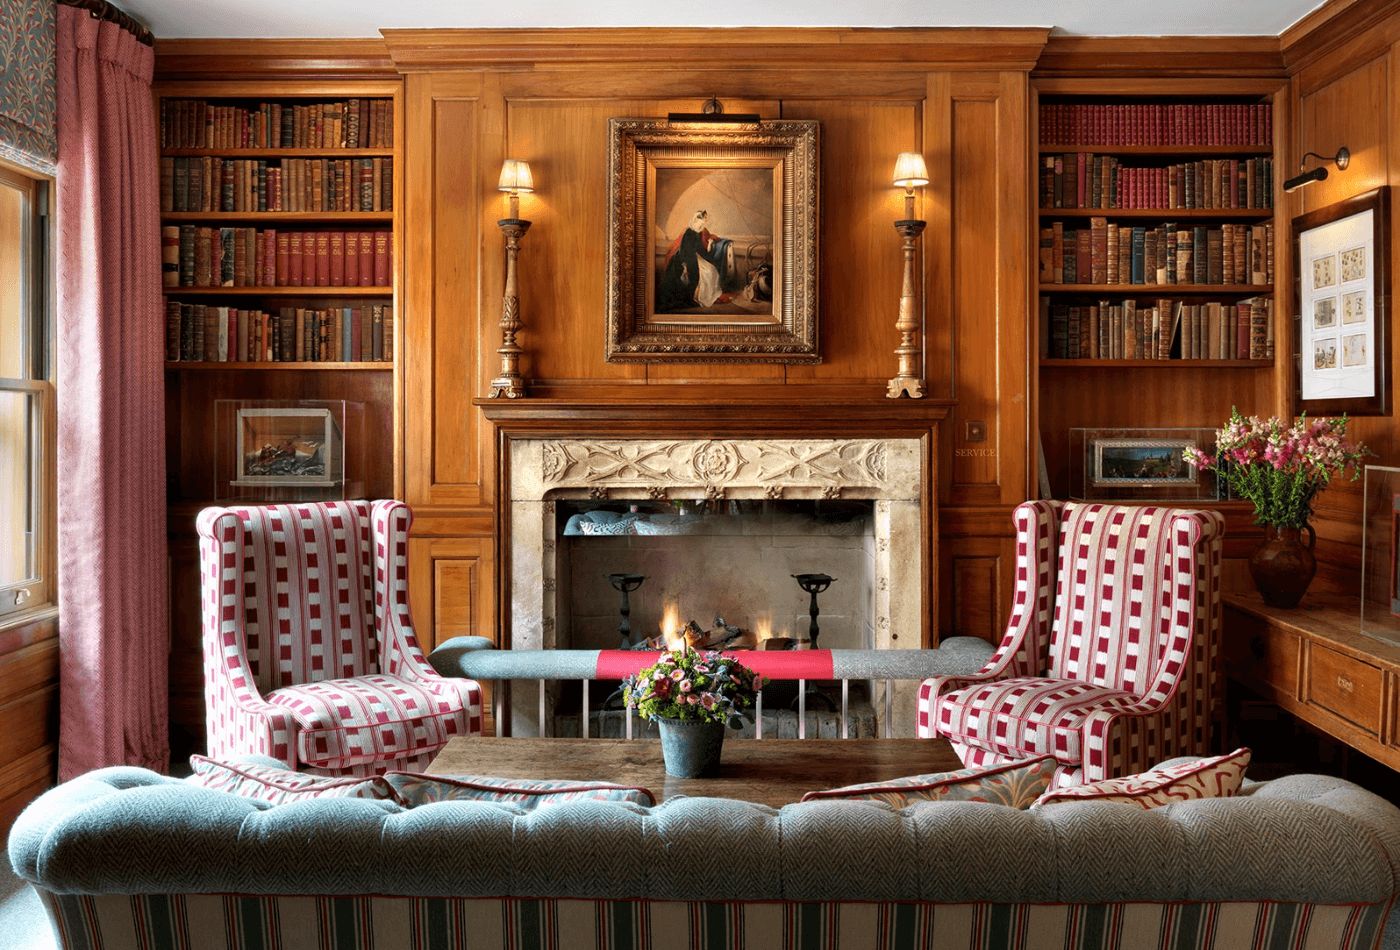 Library room with panelled walls, red patterned chairs and chesterfield sofa